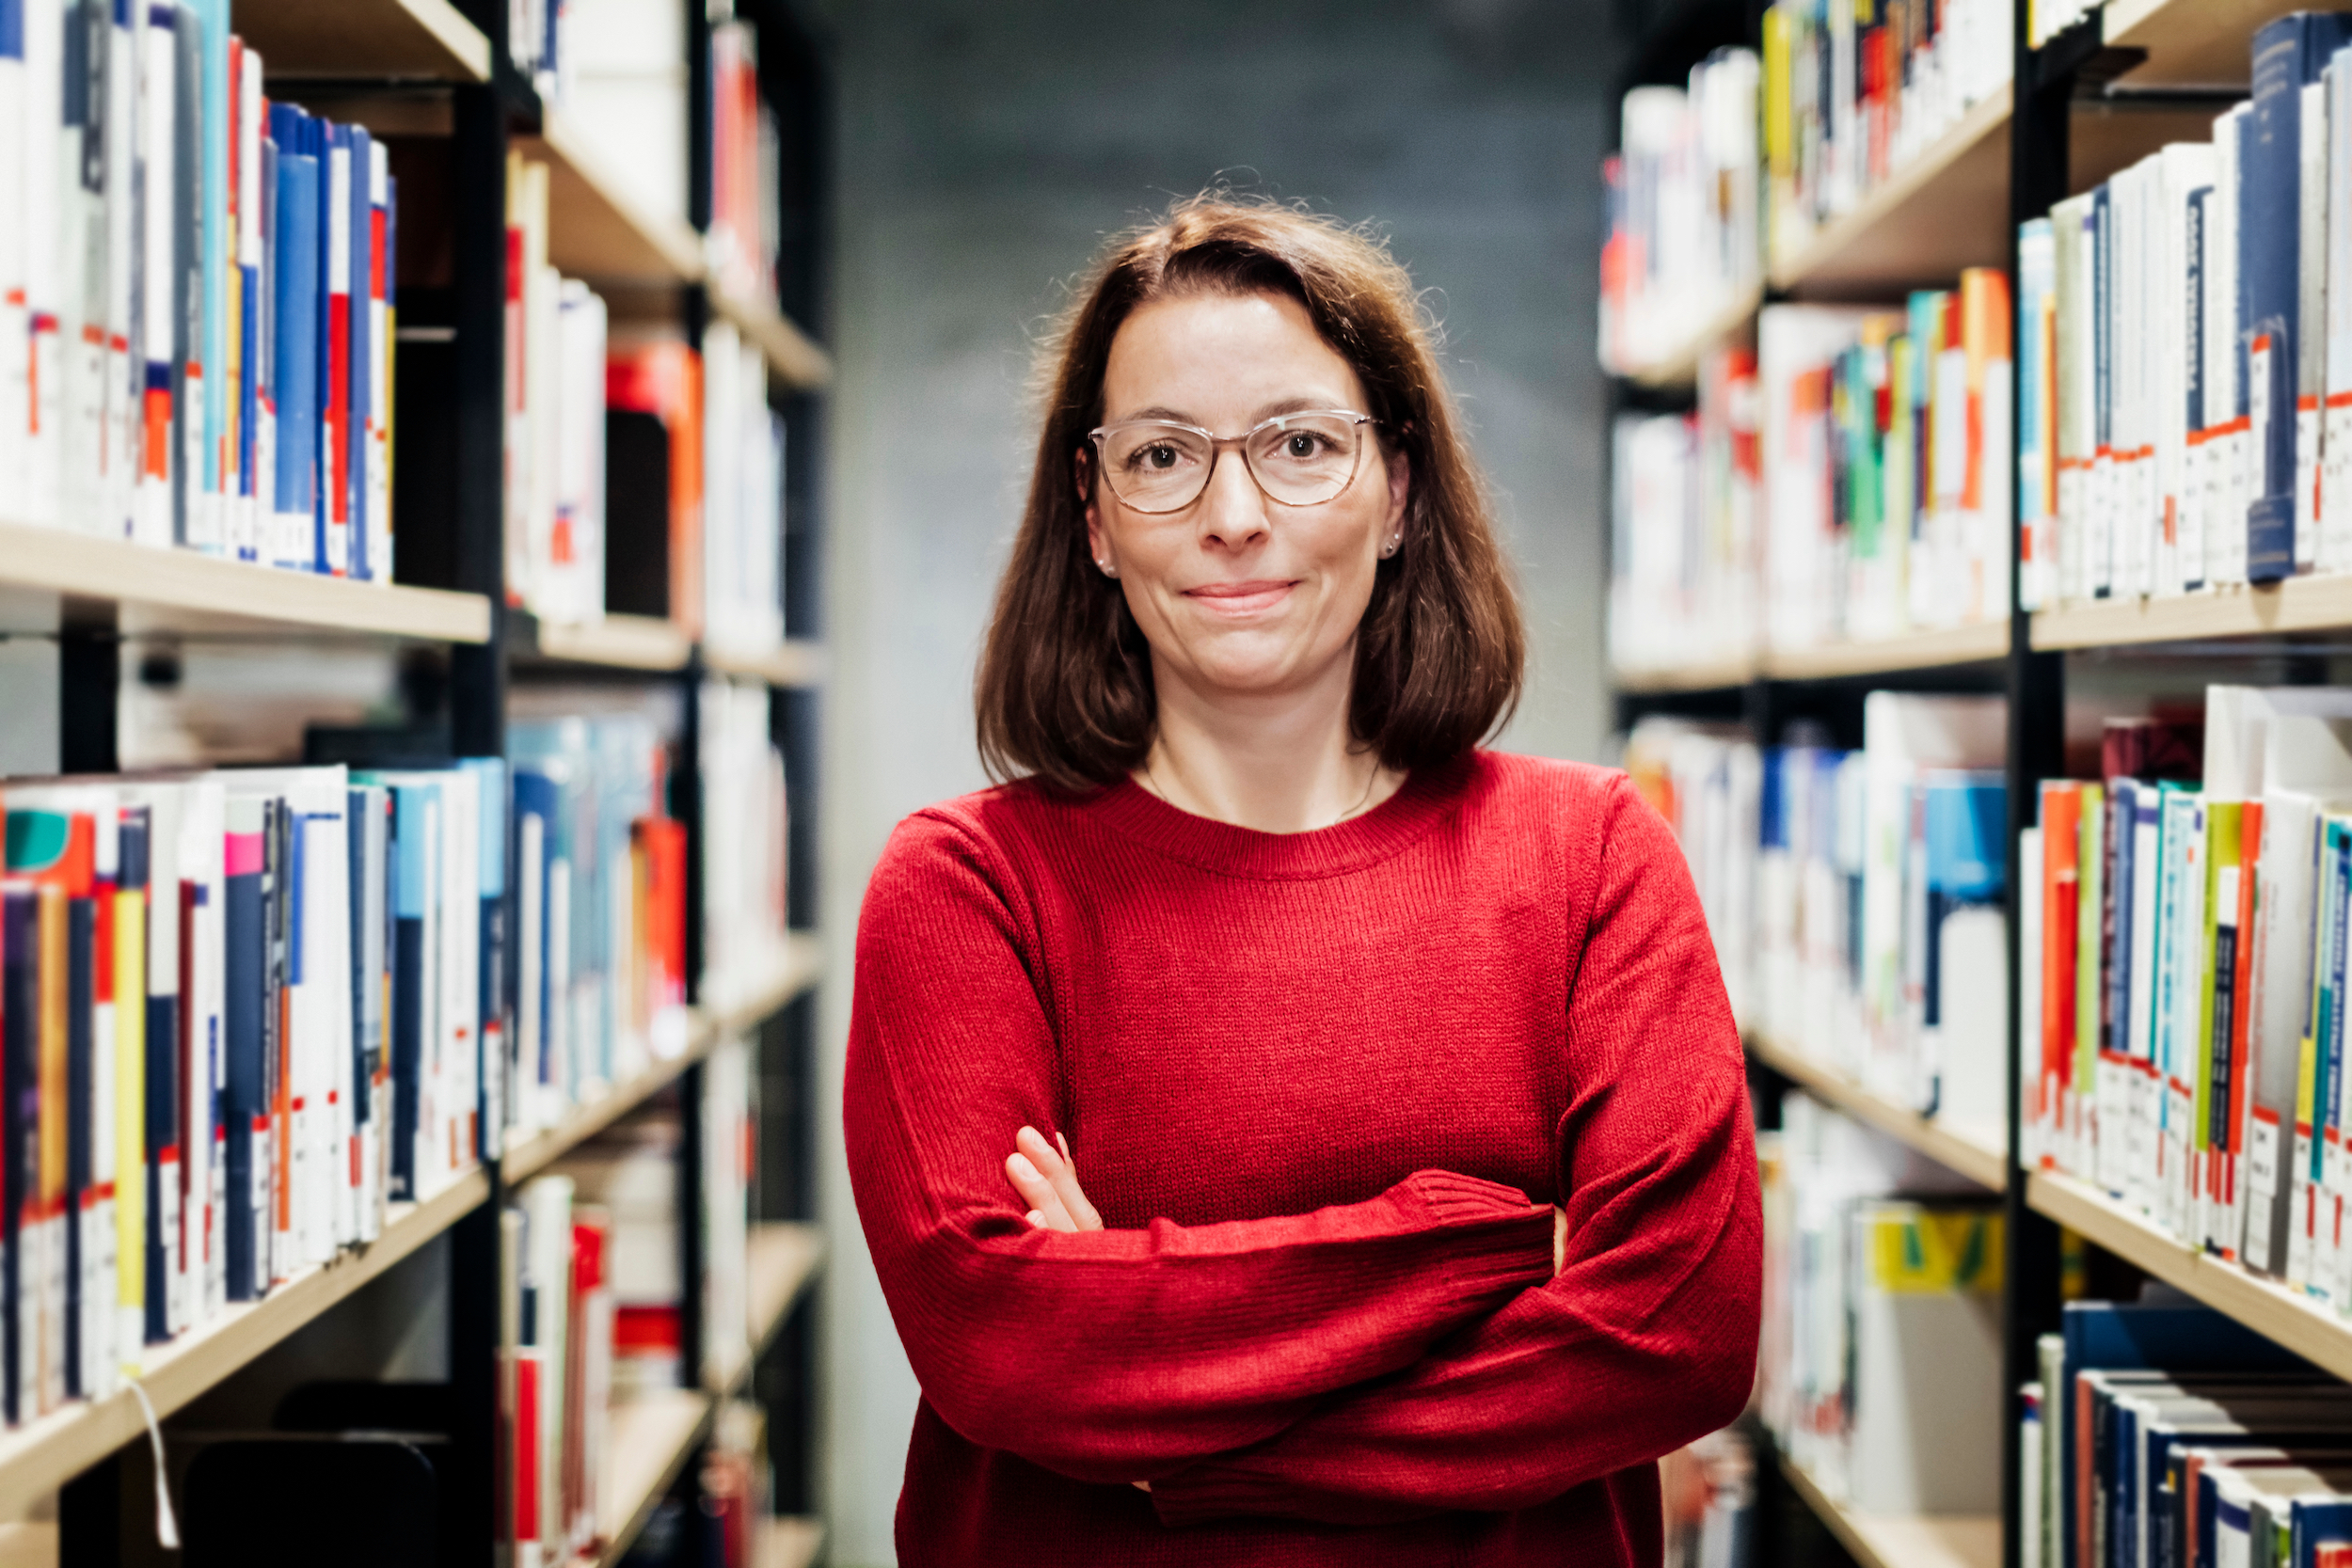 A woman in a library wearing a red sweater with her arms crossed